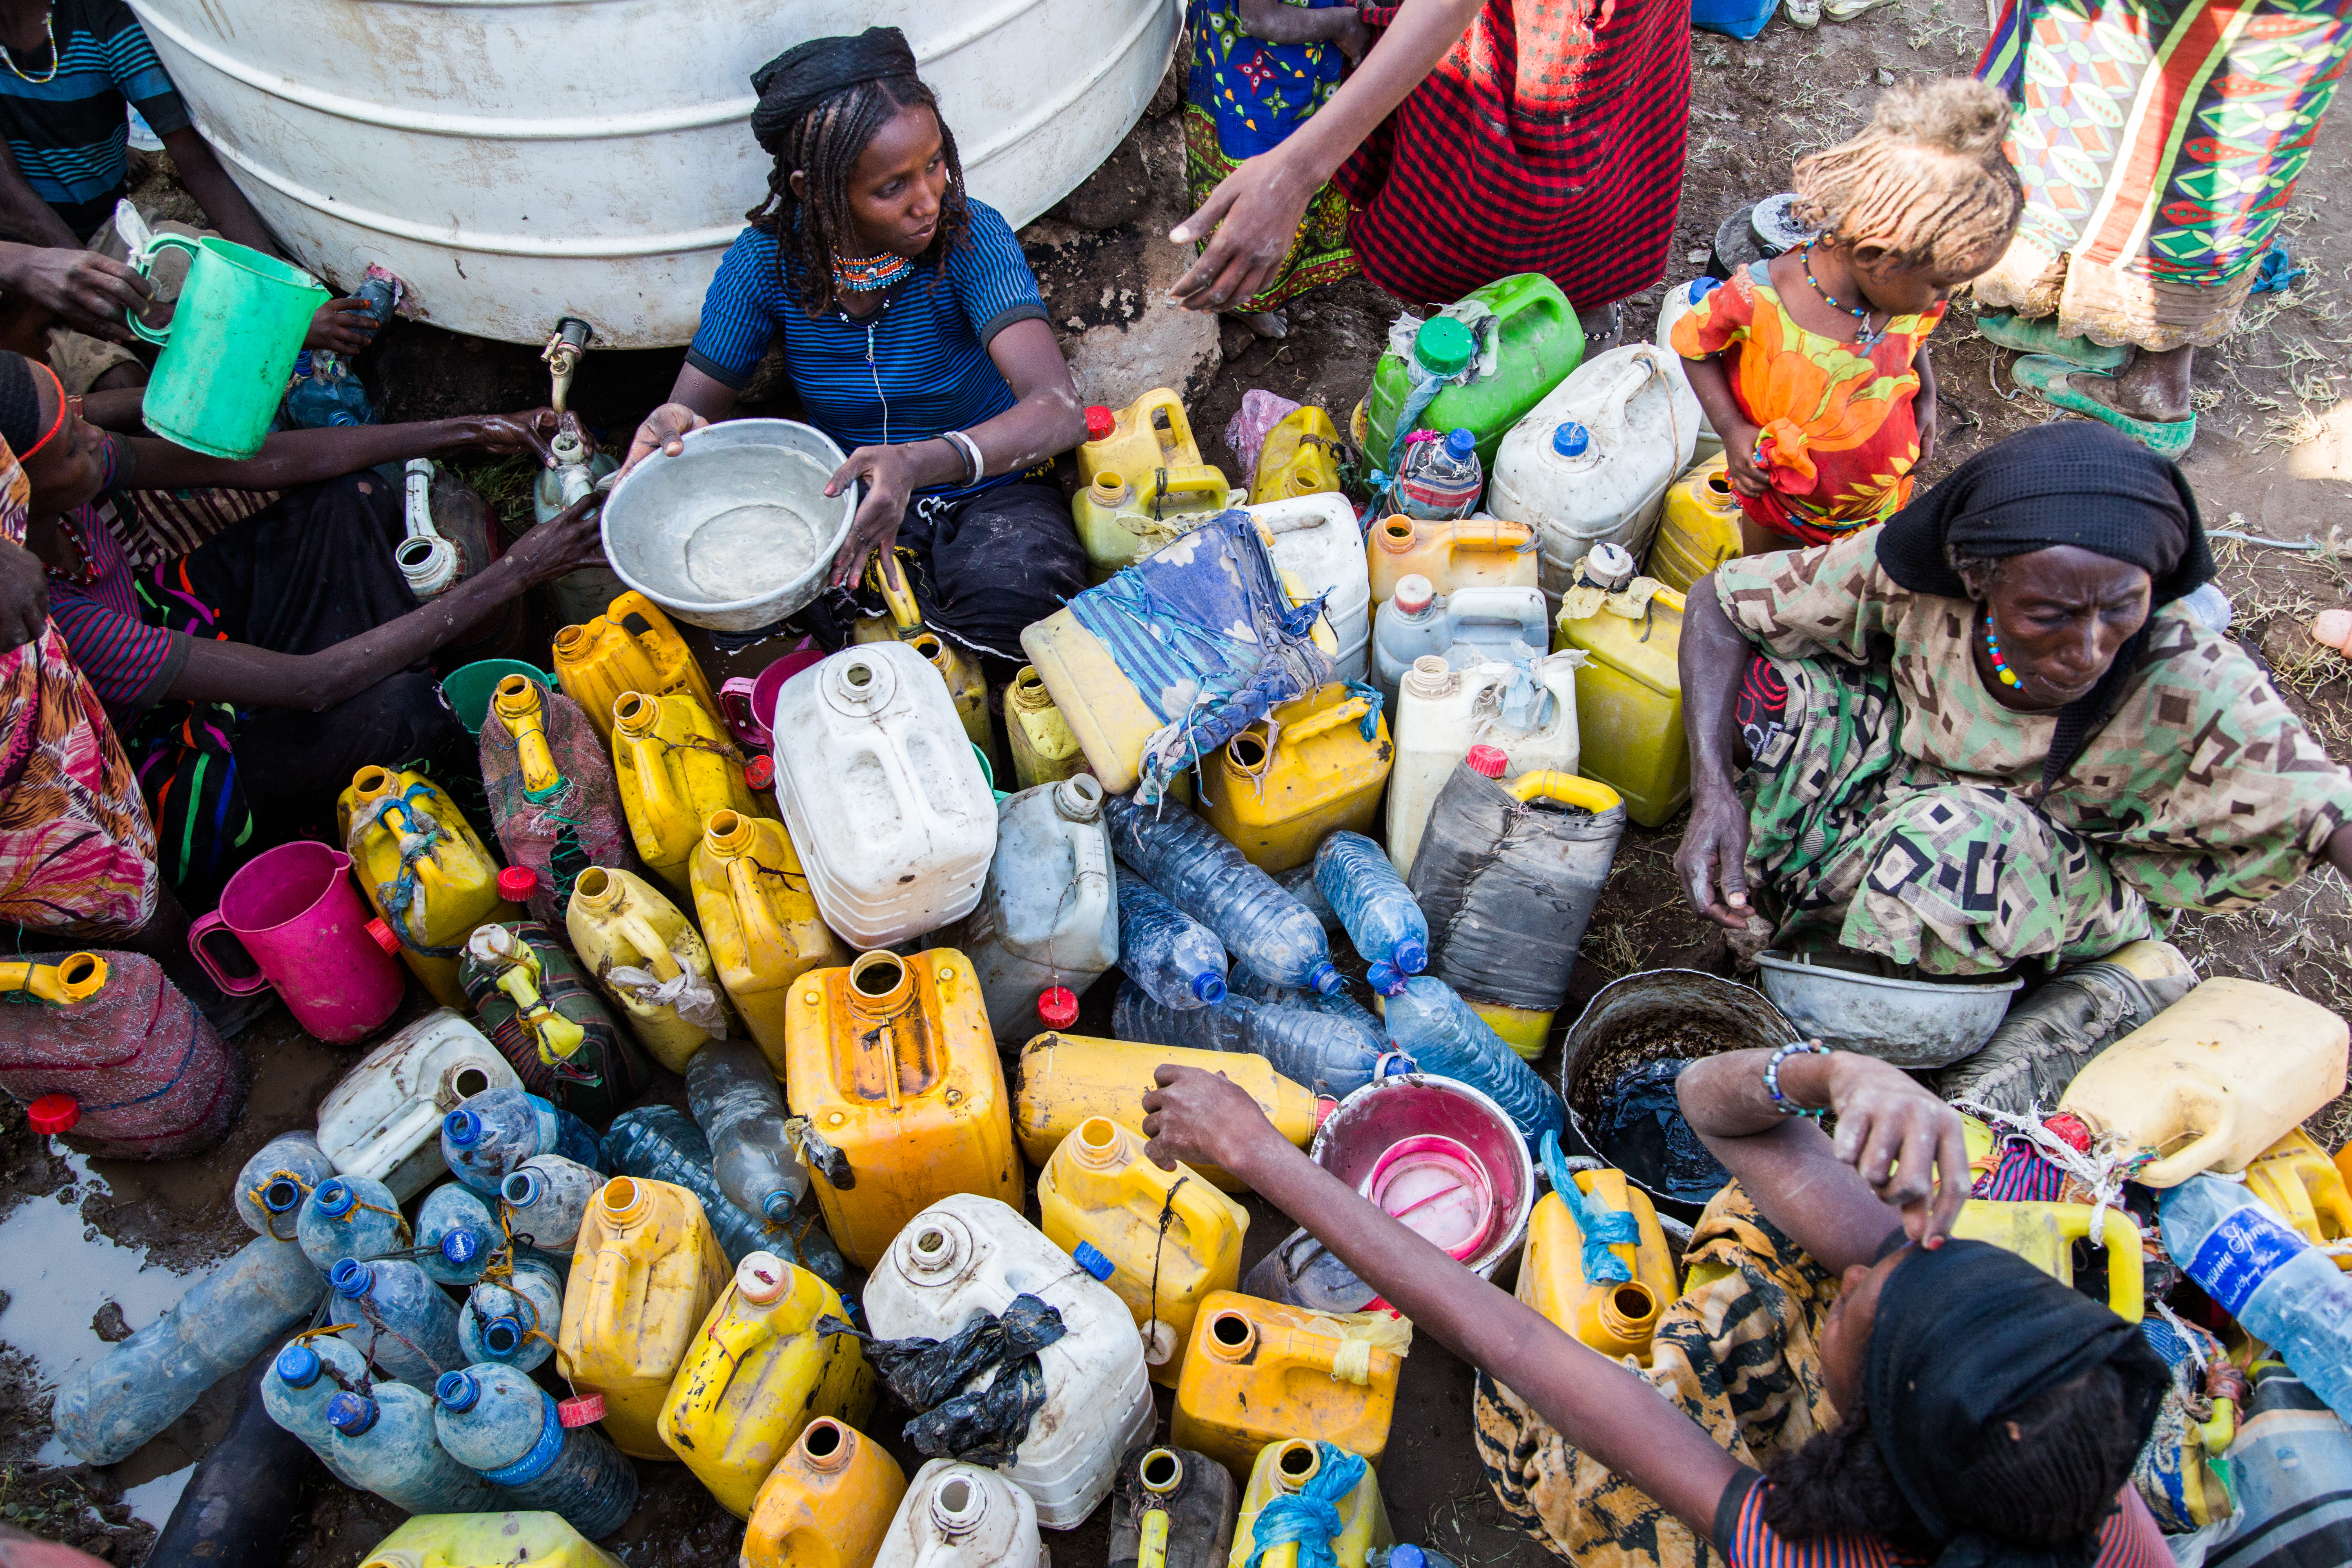 Huseyna Faraha, 20 years old, helping others in pouring water in their containers. Credit: UNICEF Ethiopia